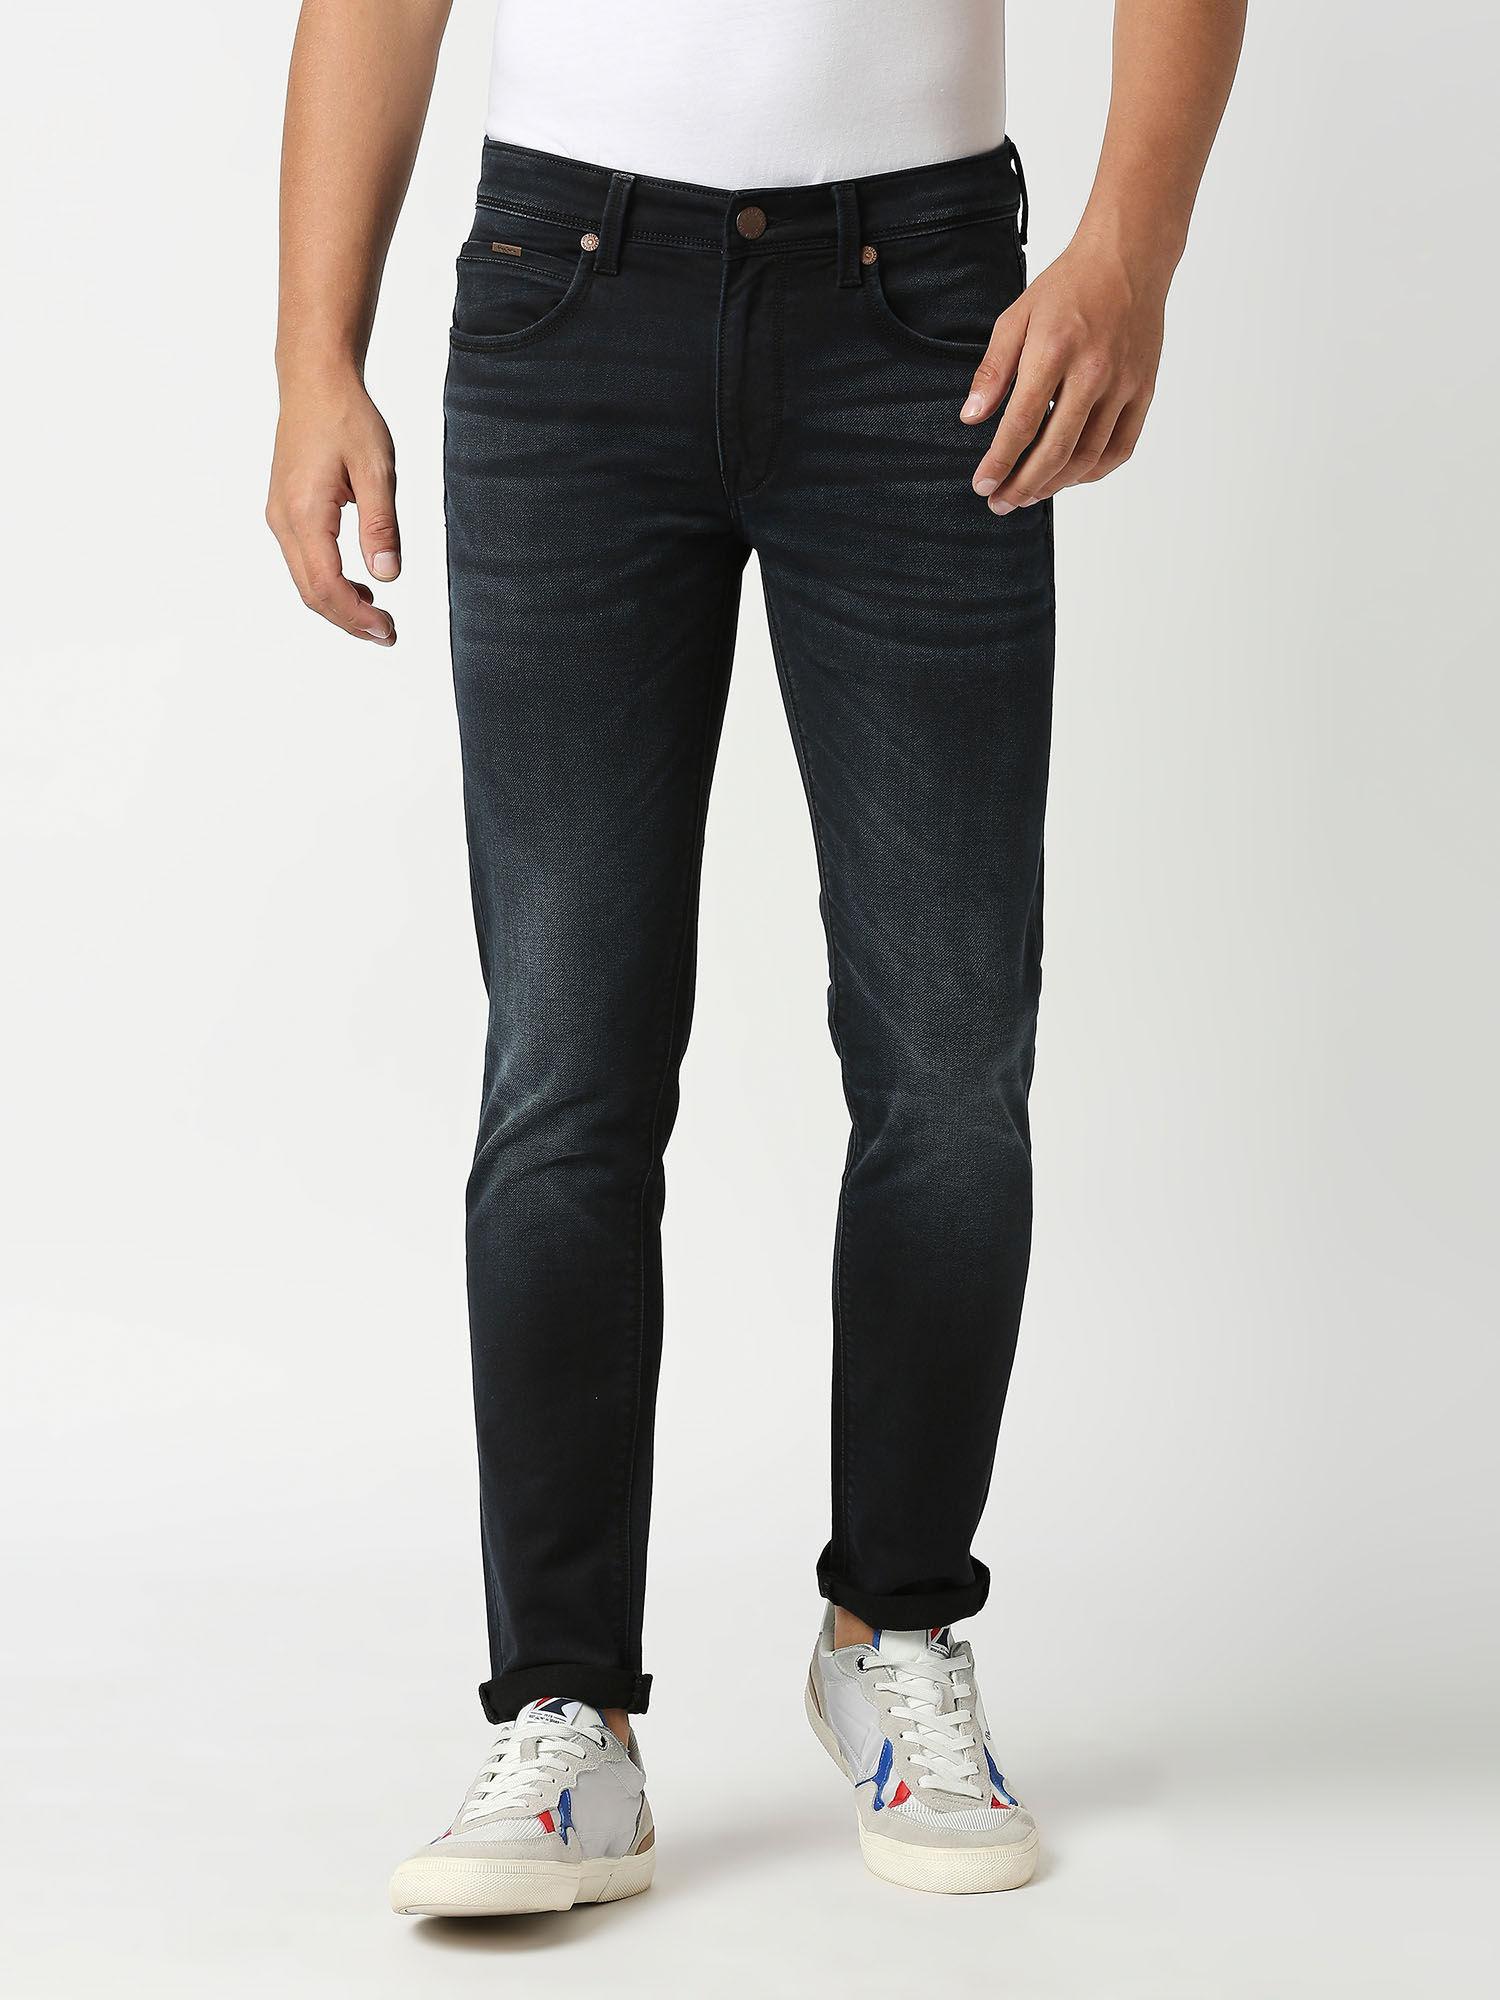 navy-blue-tapered-vapour-tapered-fit-low-waist-jeans